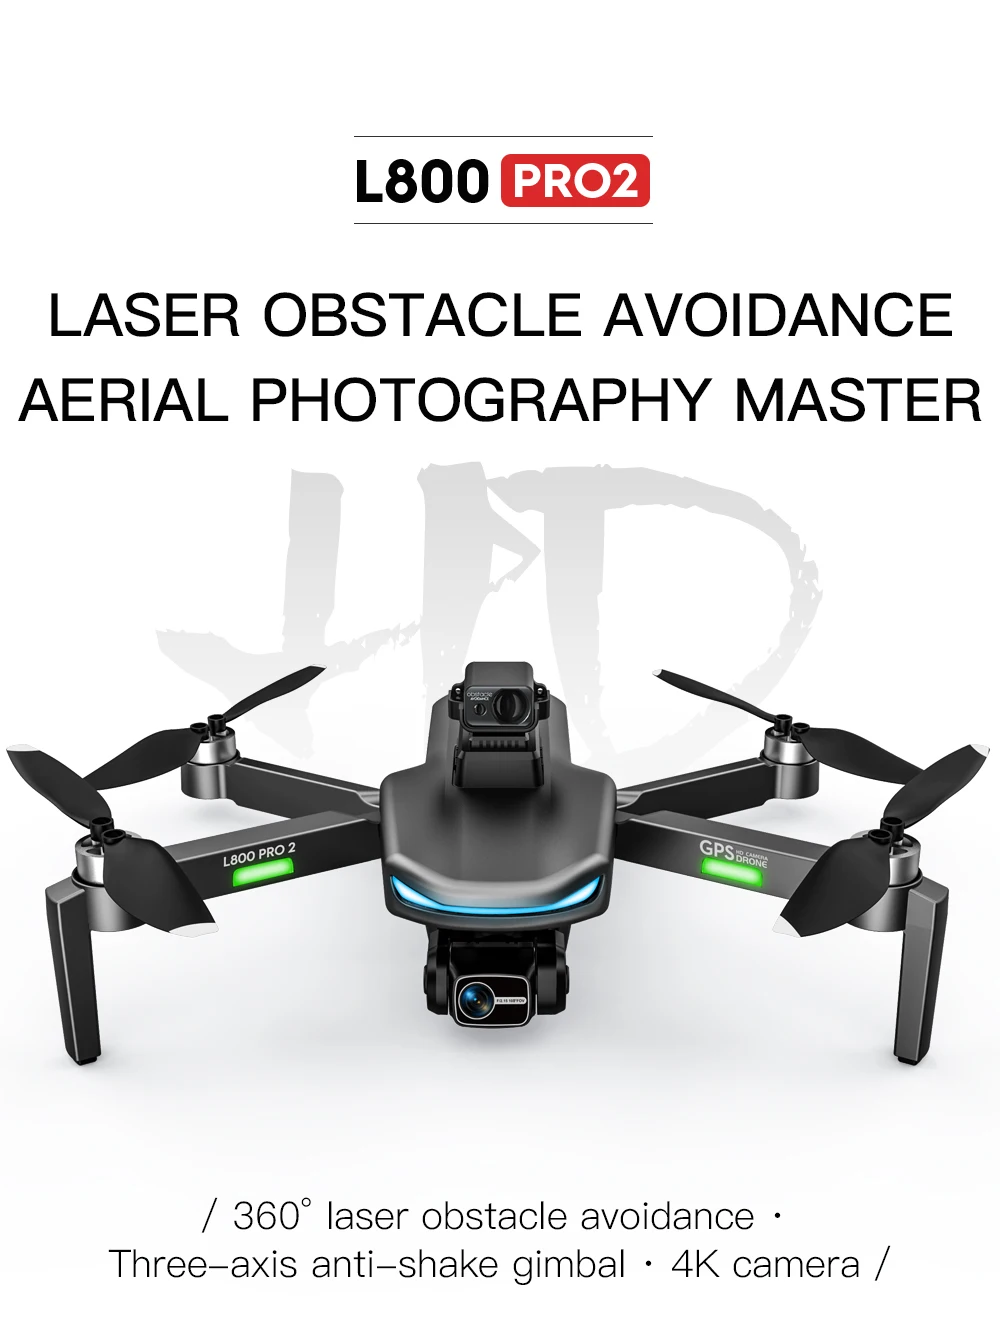 L800 Pro2 Drone, L8oo PRO2 LASER OBSTACLE AVOIDANCE AERIAL